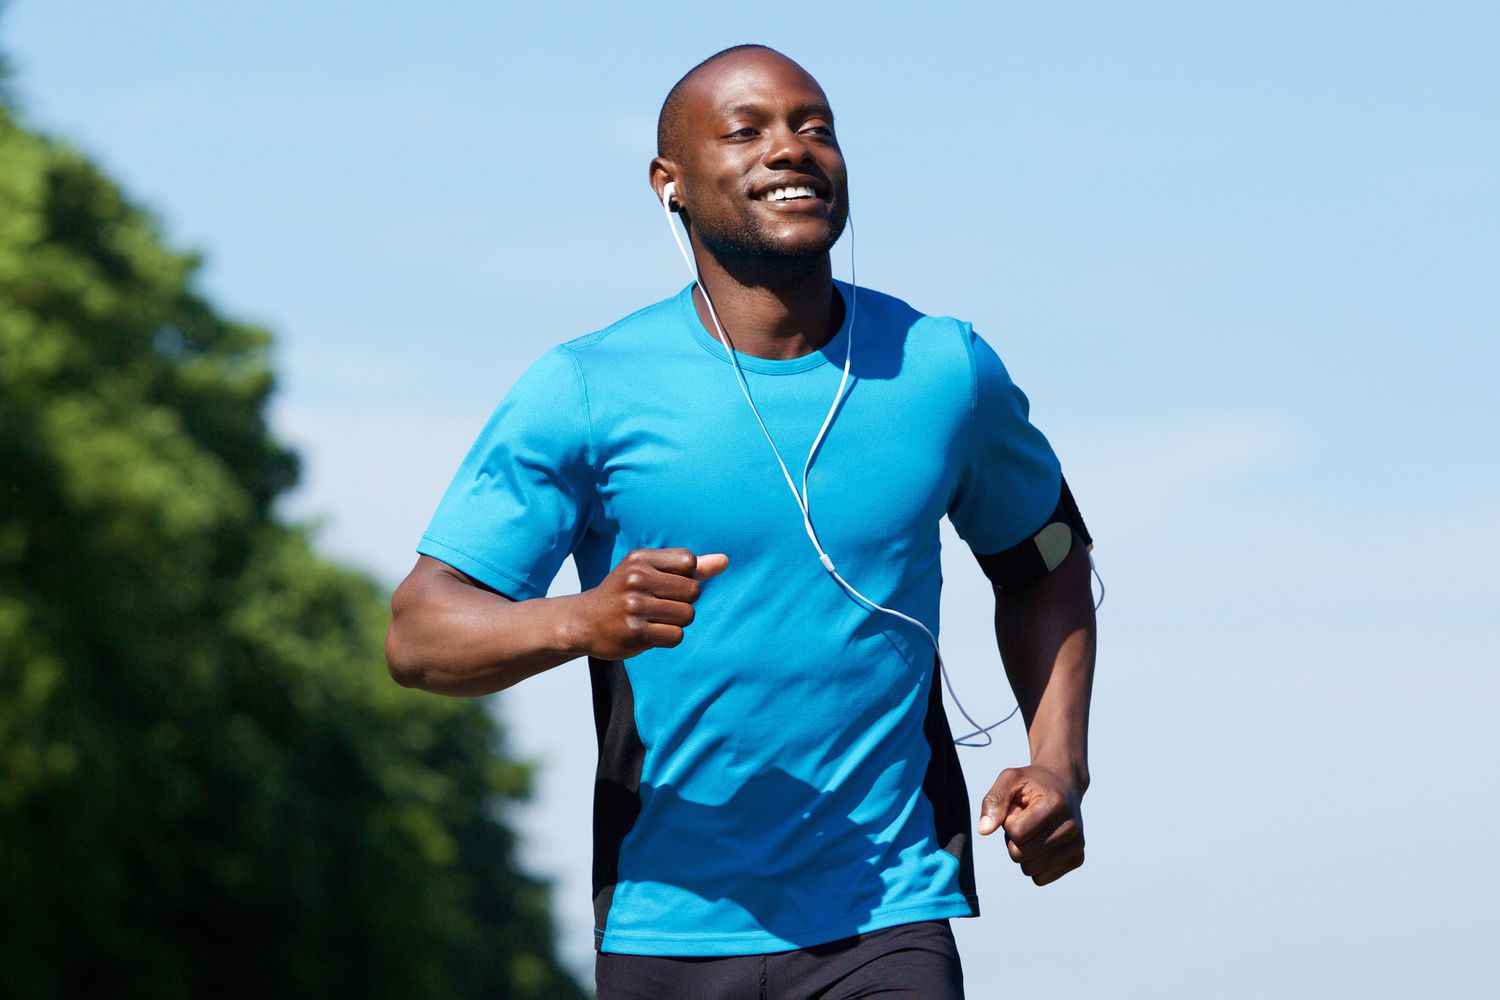 Portrait of an active African American man running exercise workout outdoors